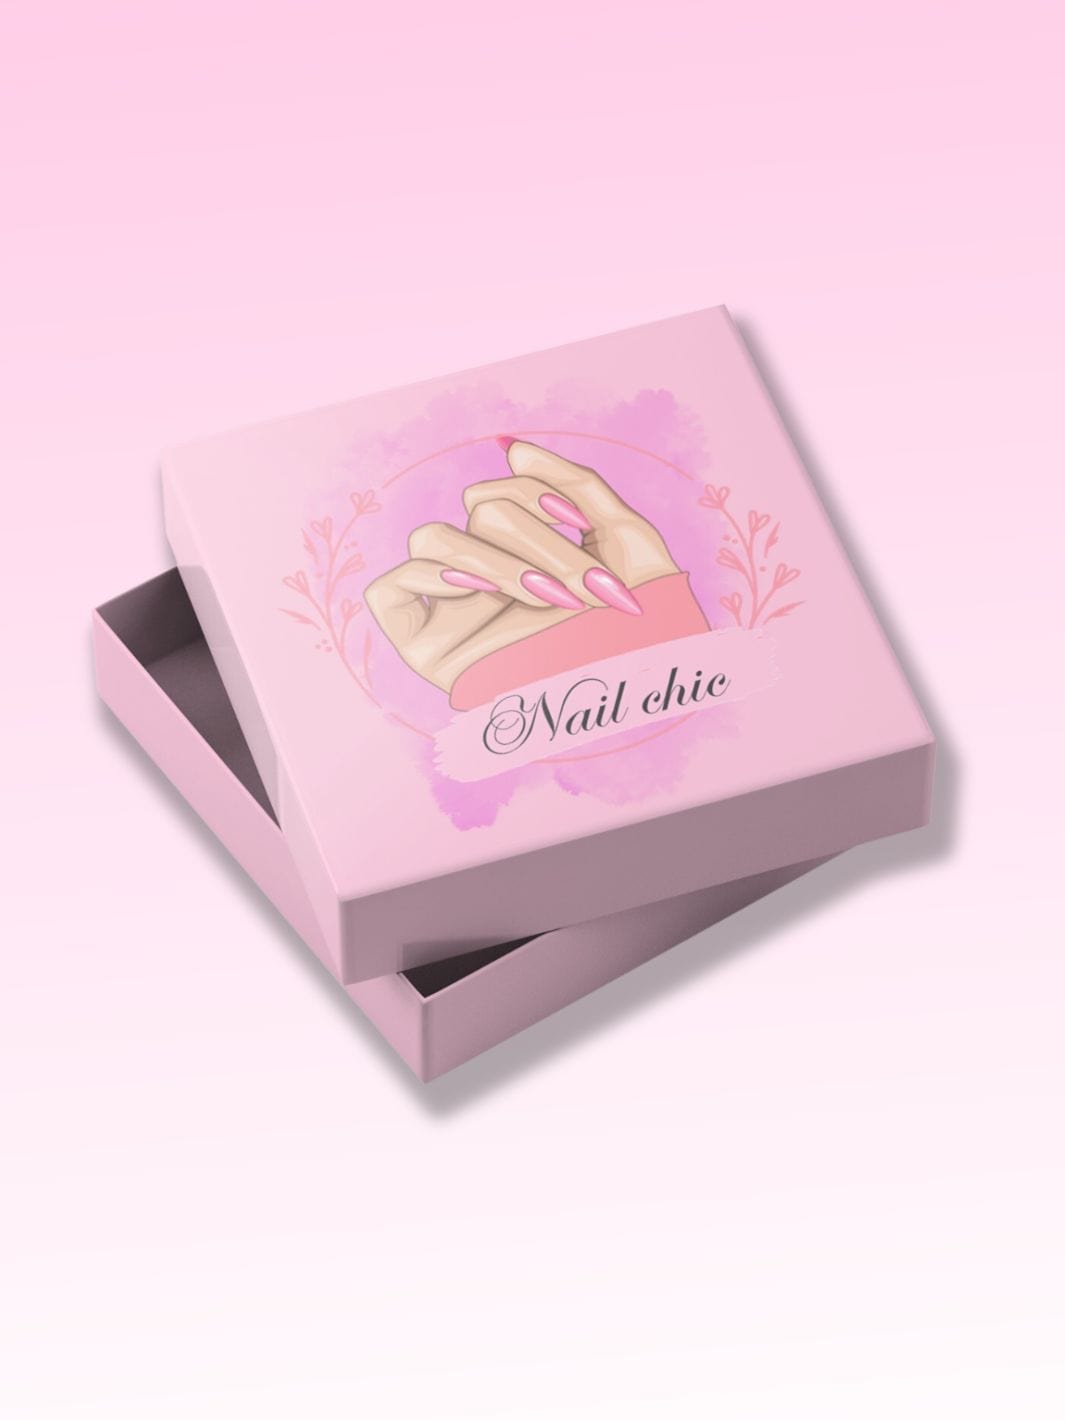 Faux ongle rose pastel Nail Chic